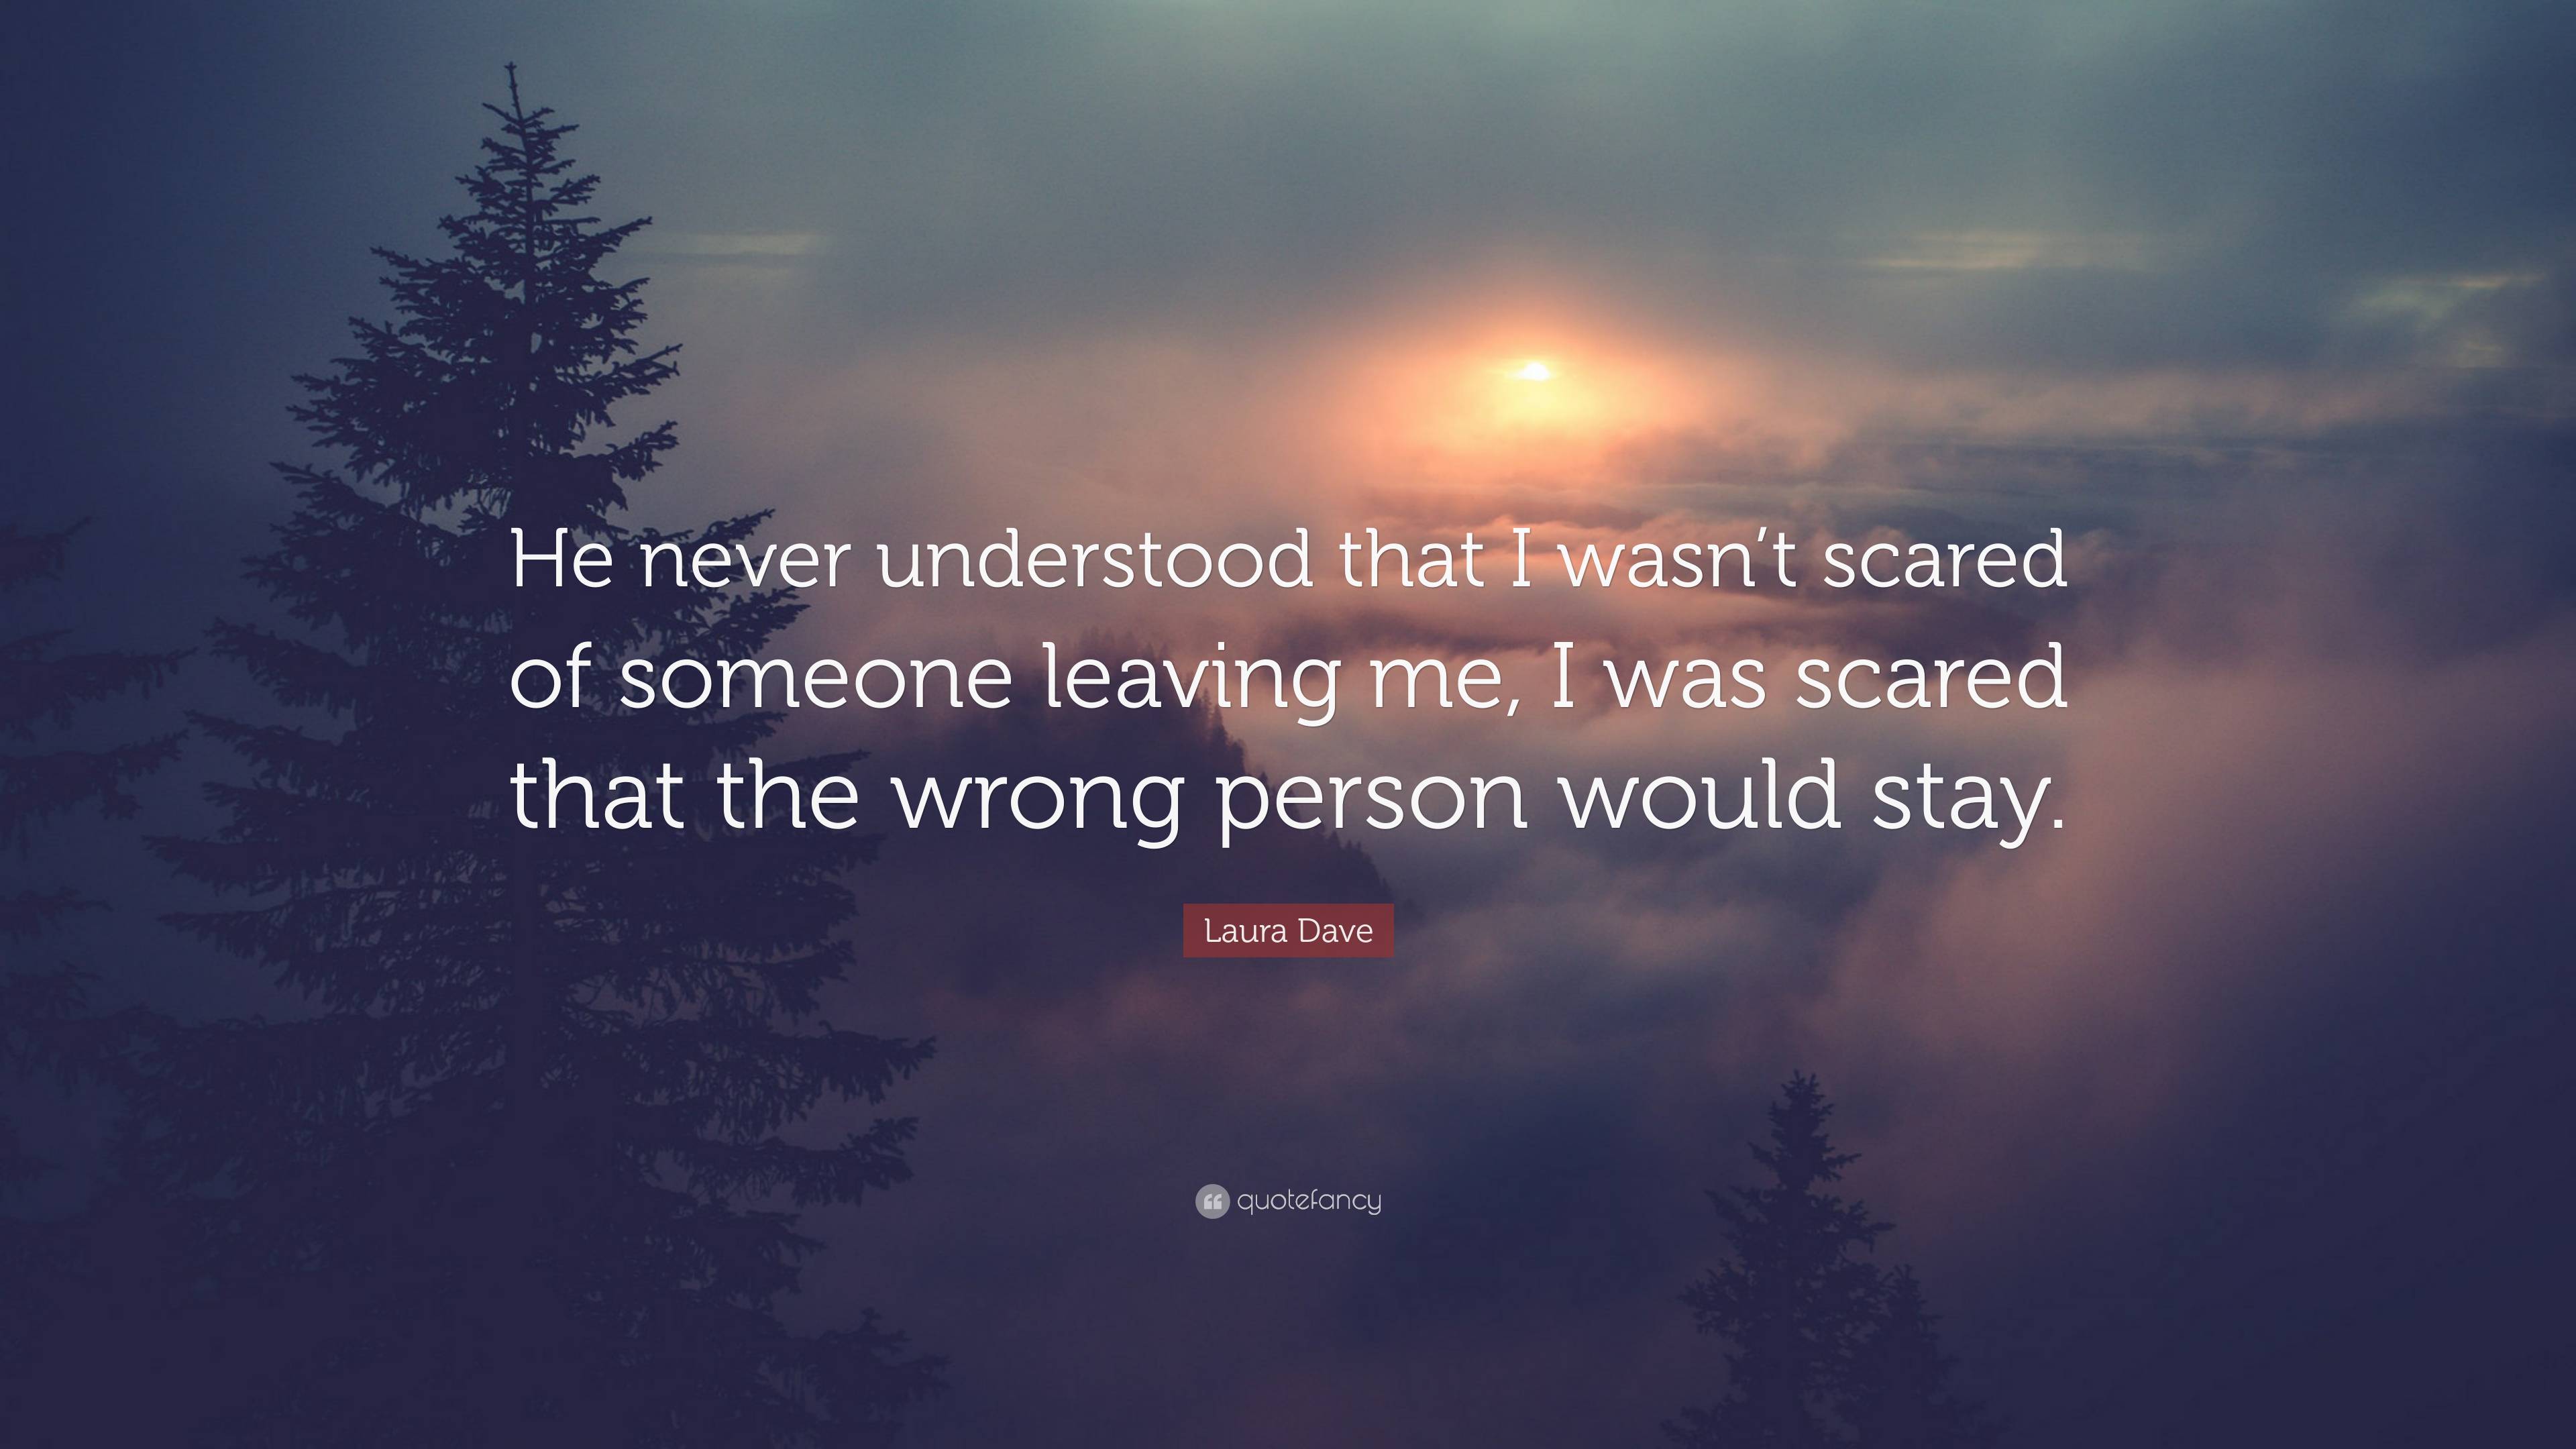 Laura Dave Quote: “He never understood that I wasn’t scared of someone ...